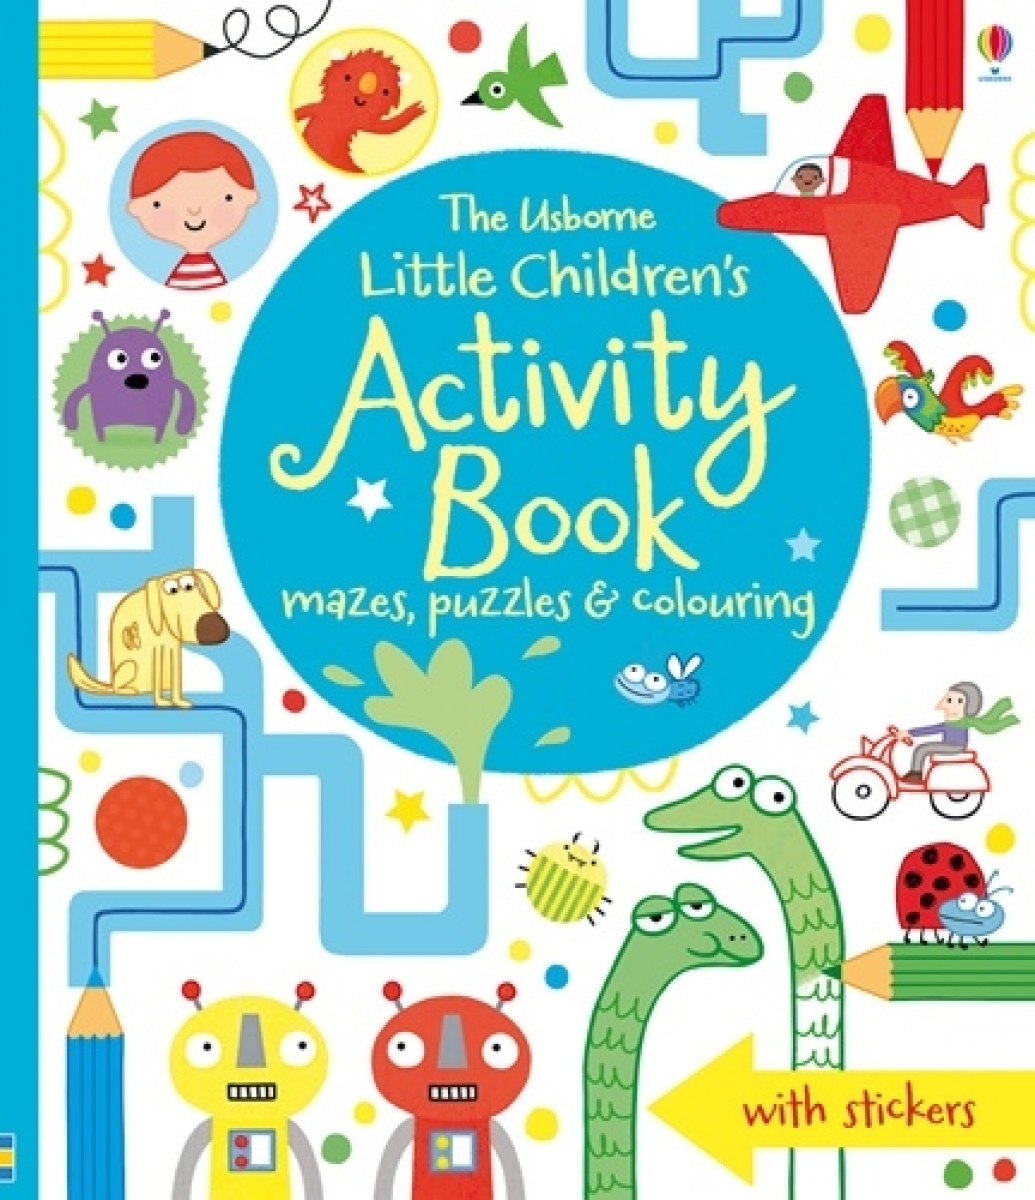 Bowman Lucy, Maclaine James The Usborne Little Children's Activity Book: Mazes, Puzzles and Colouring 